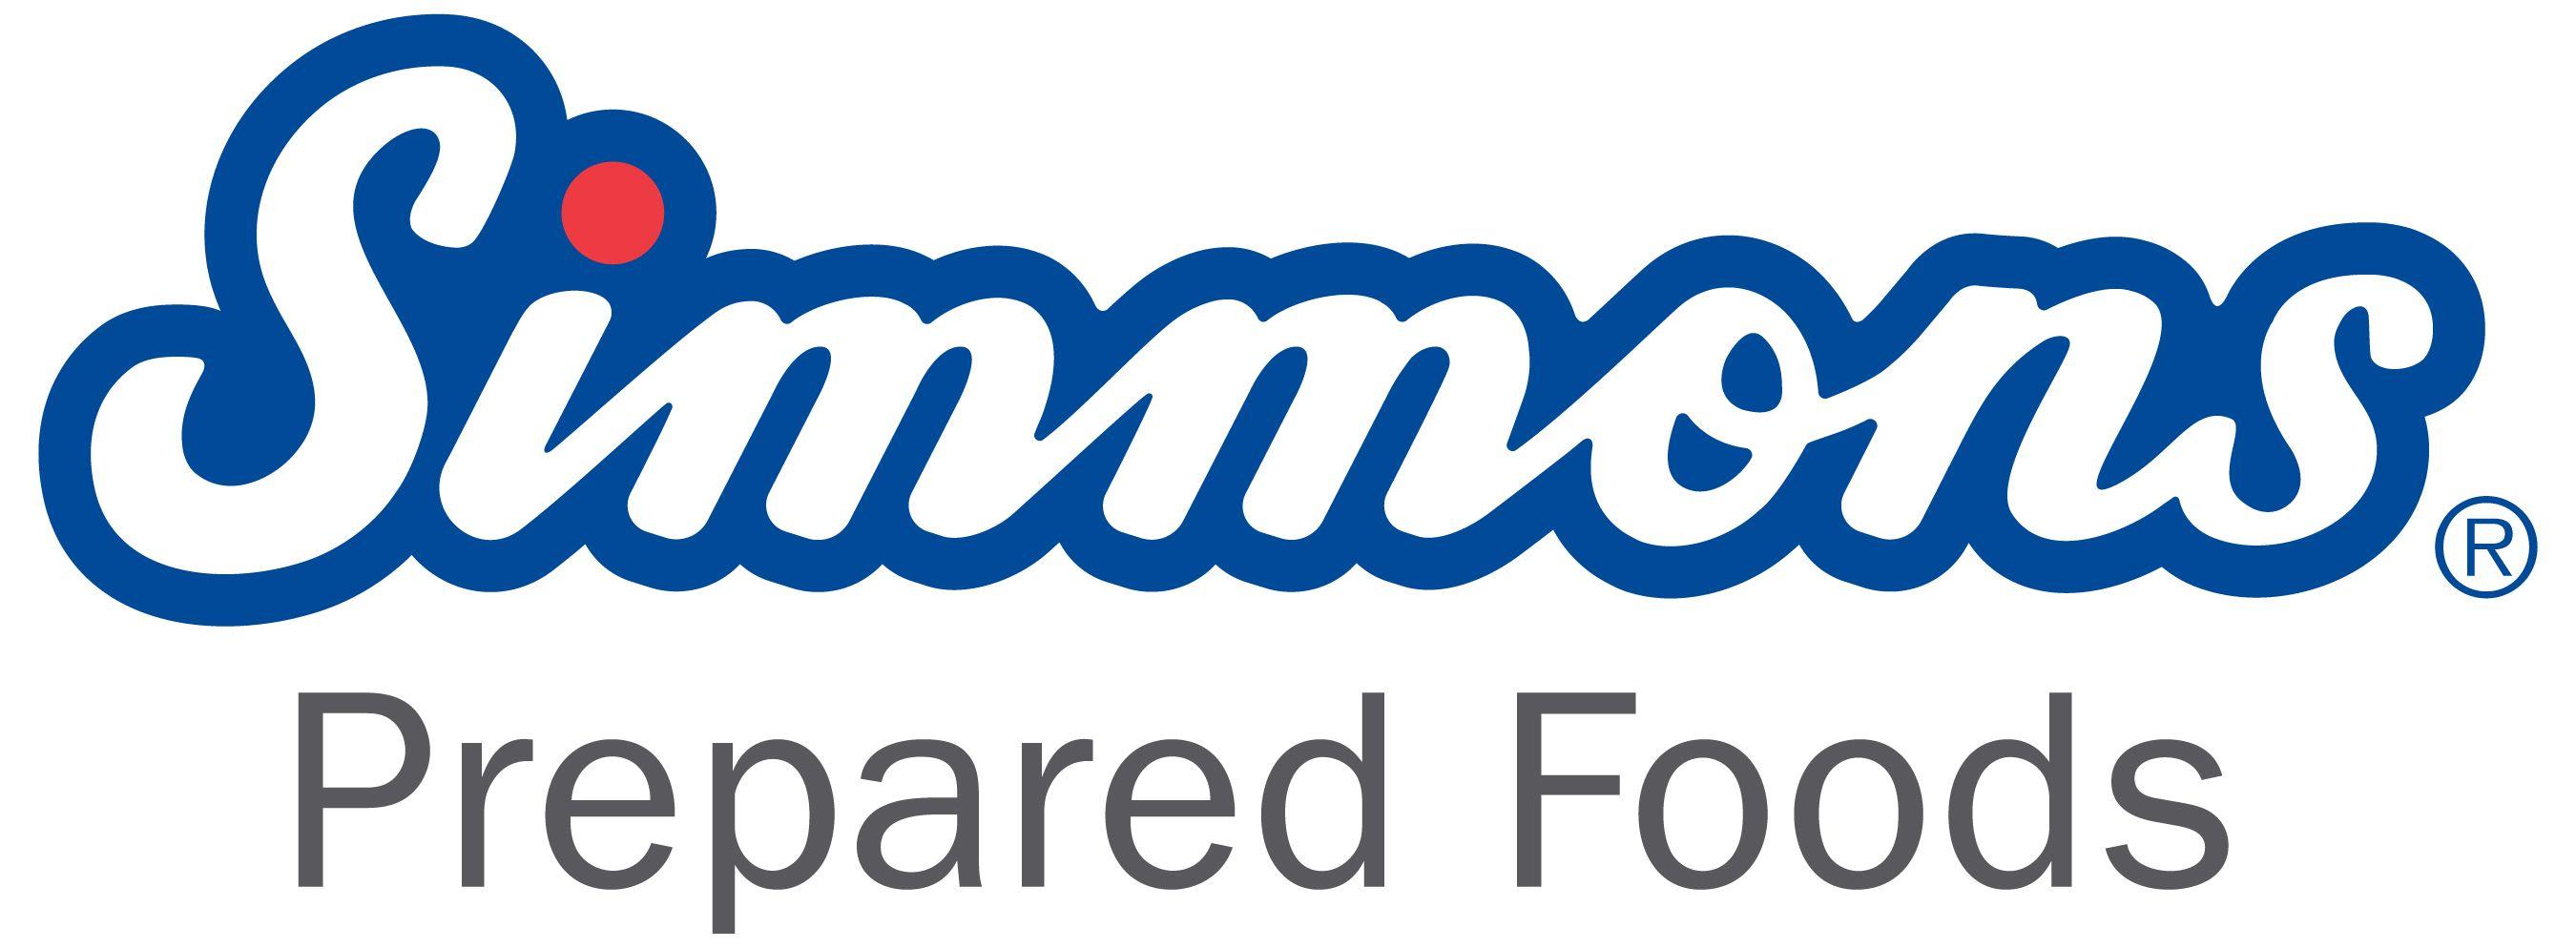 White with Blue Oval Food Logo - Simmons Branding — Simmons Foods